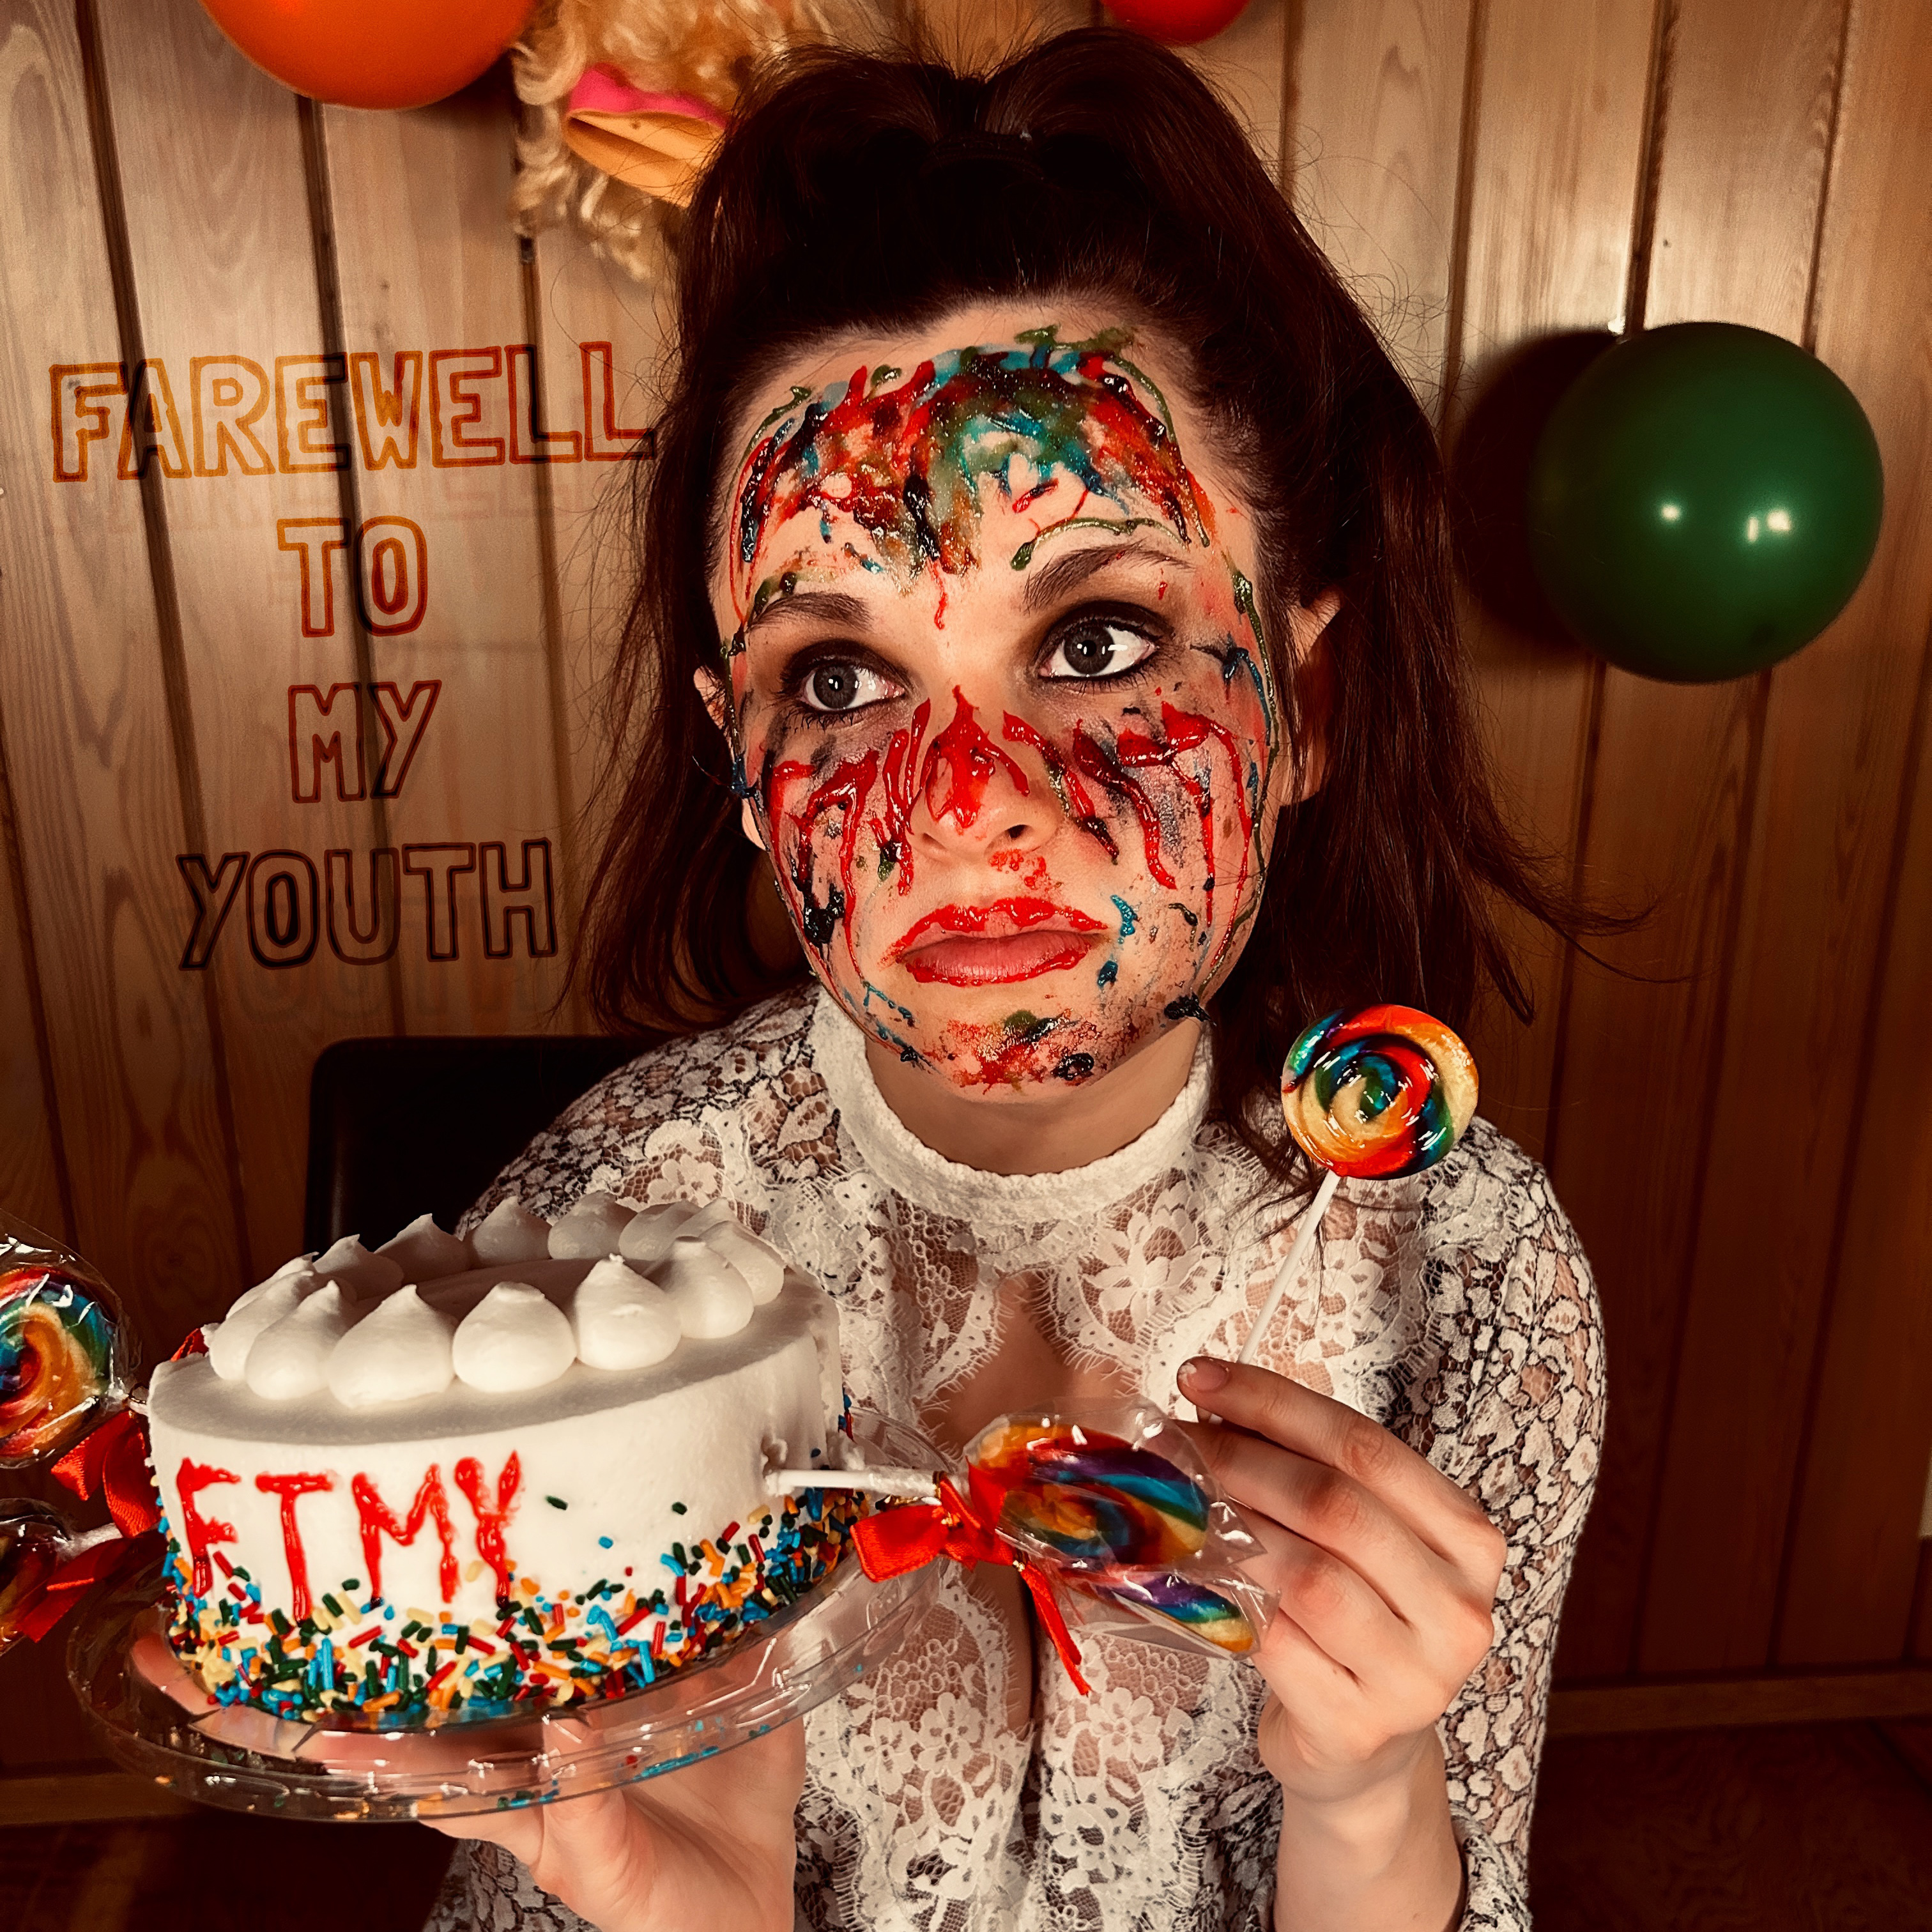 Emily Ricks – “Farewell to My Youth”